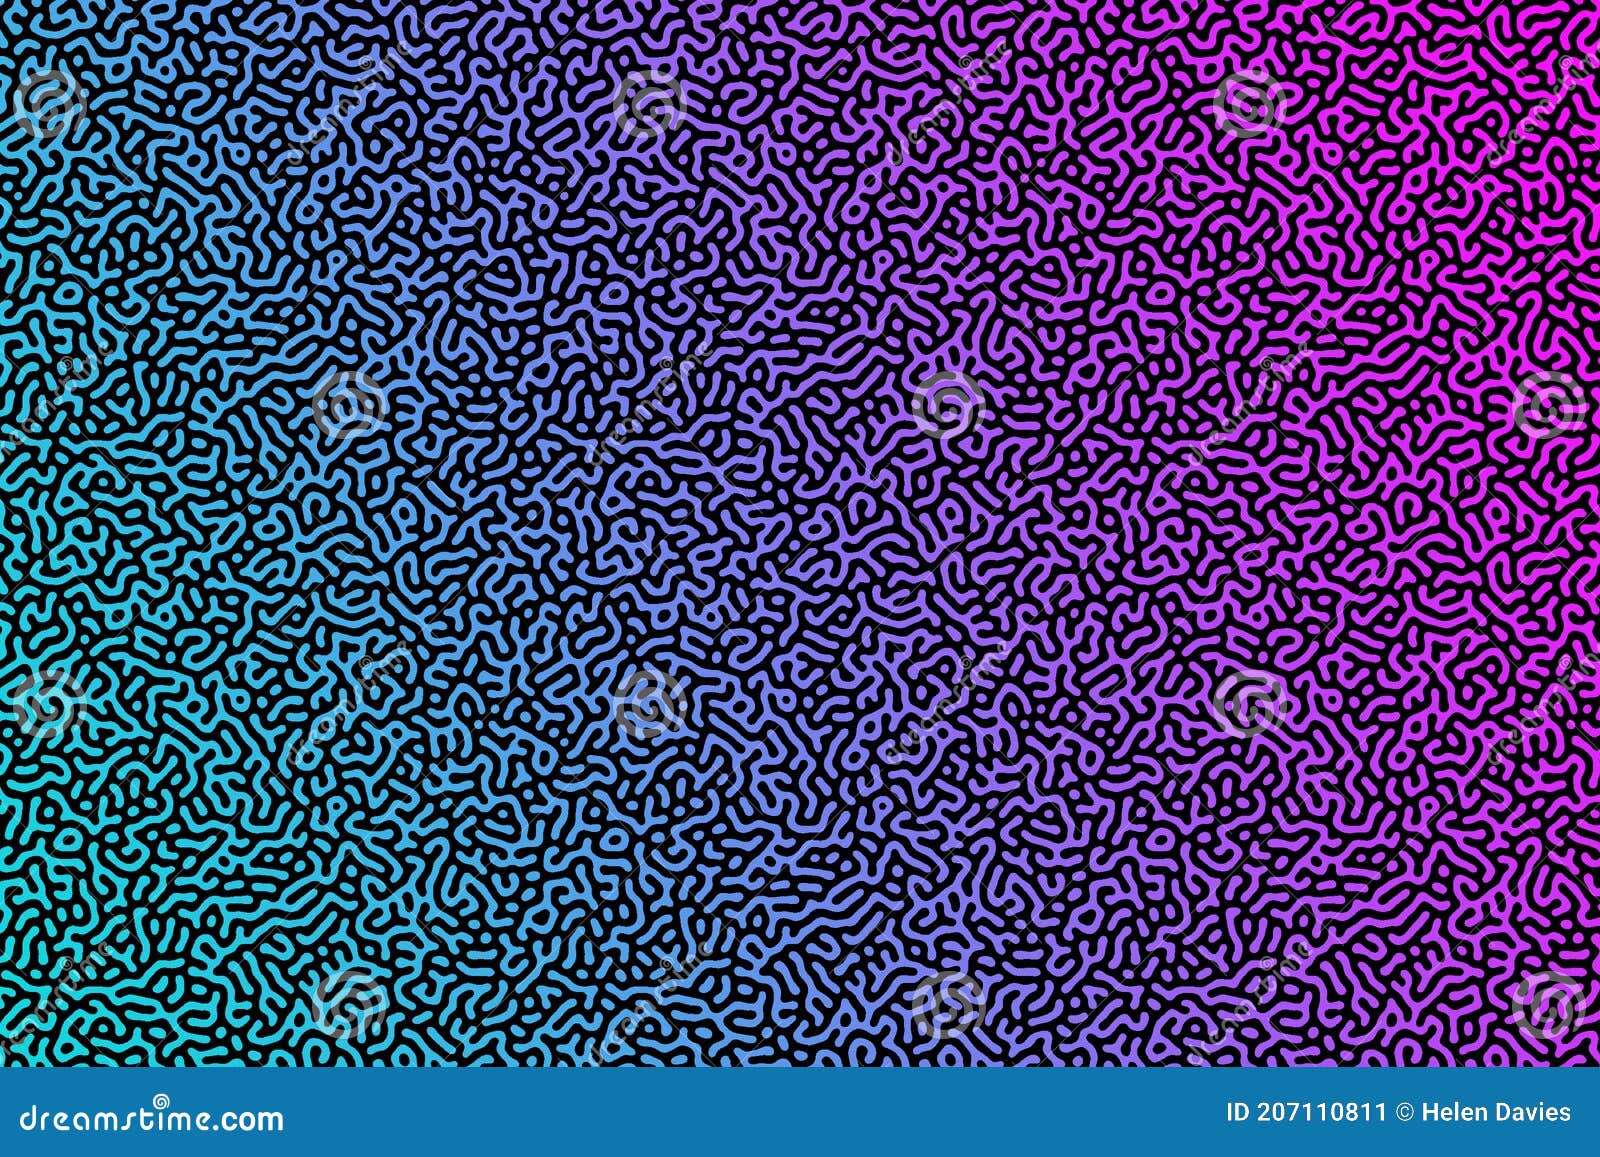 black turing pattern against blue and pink background